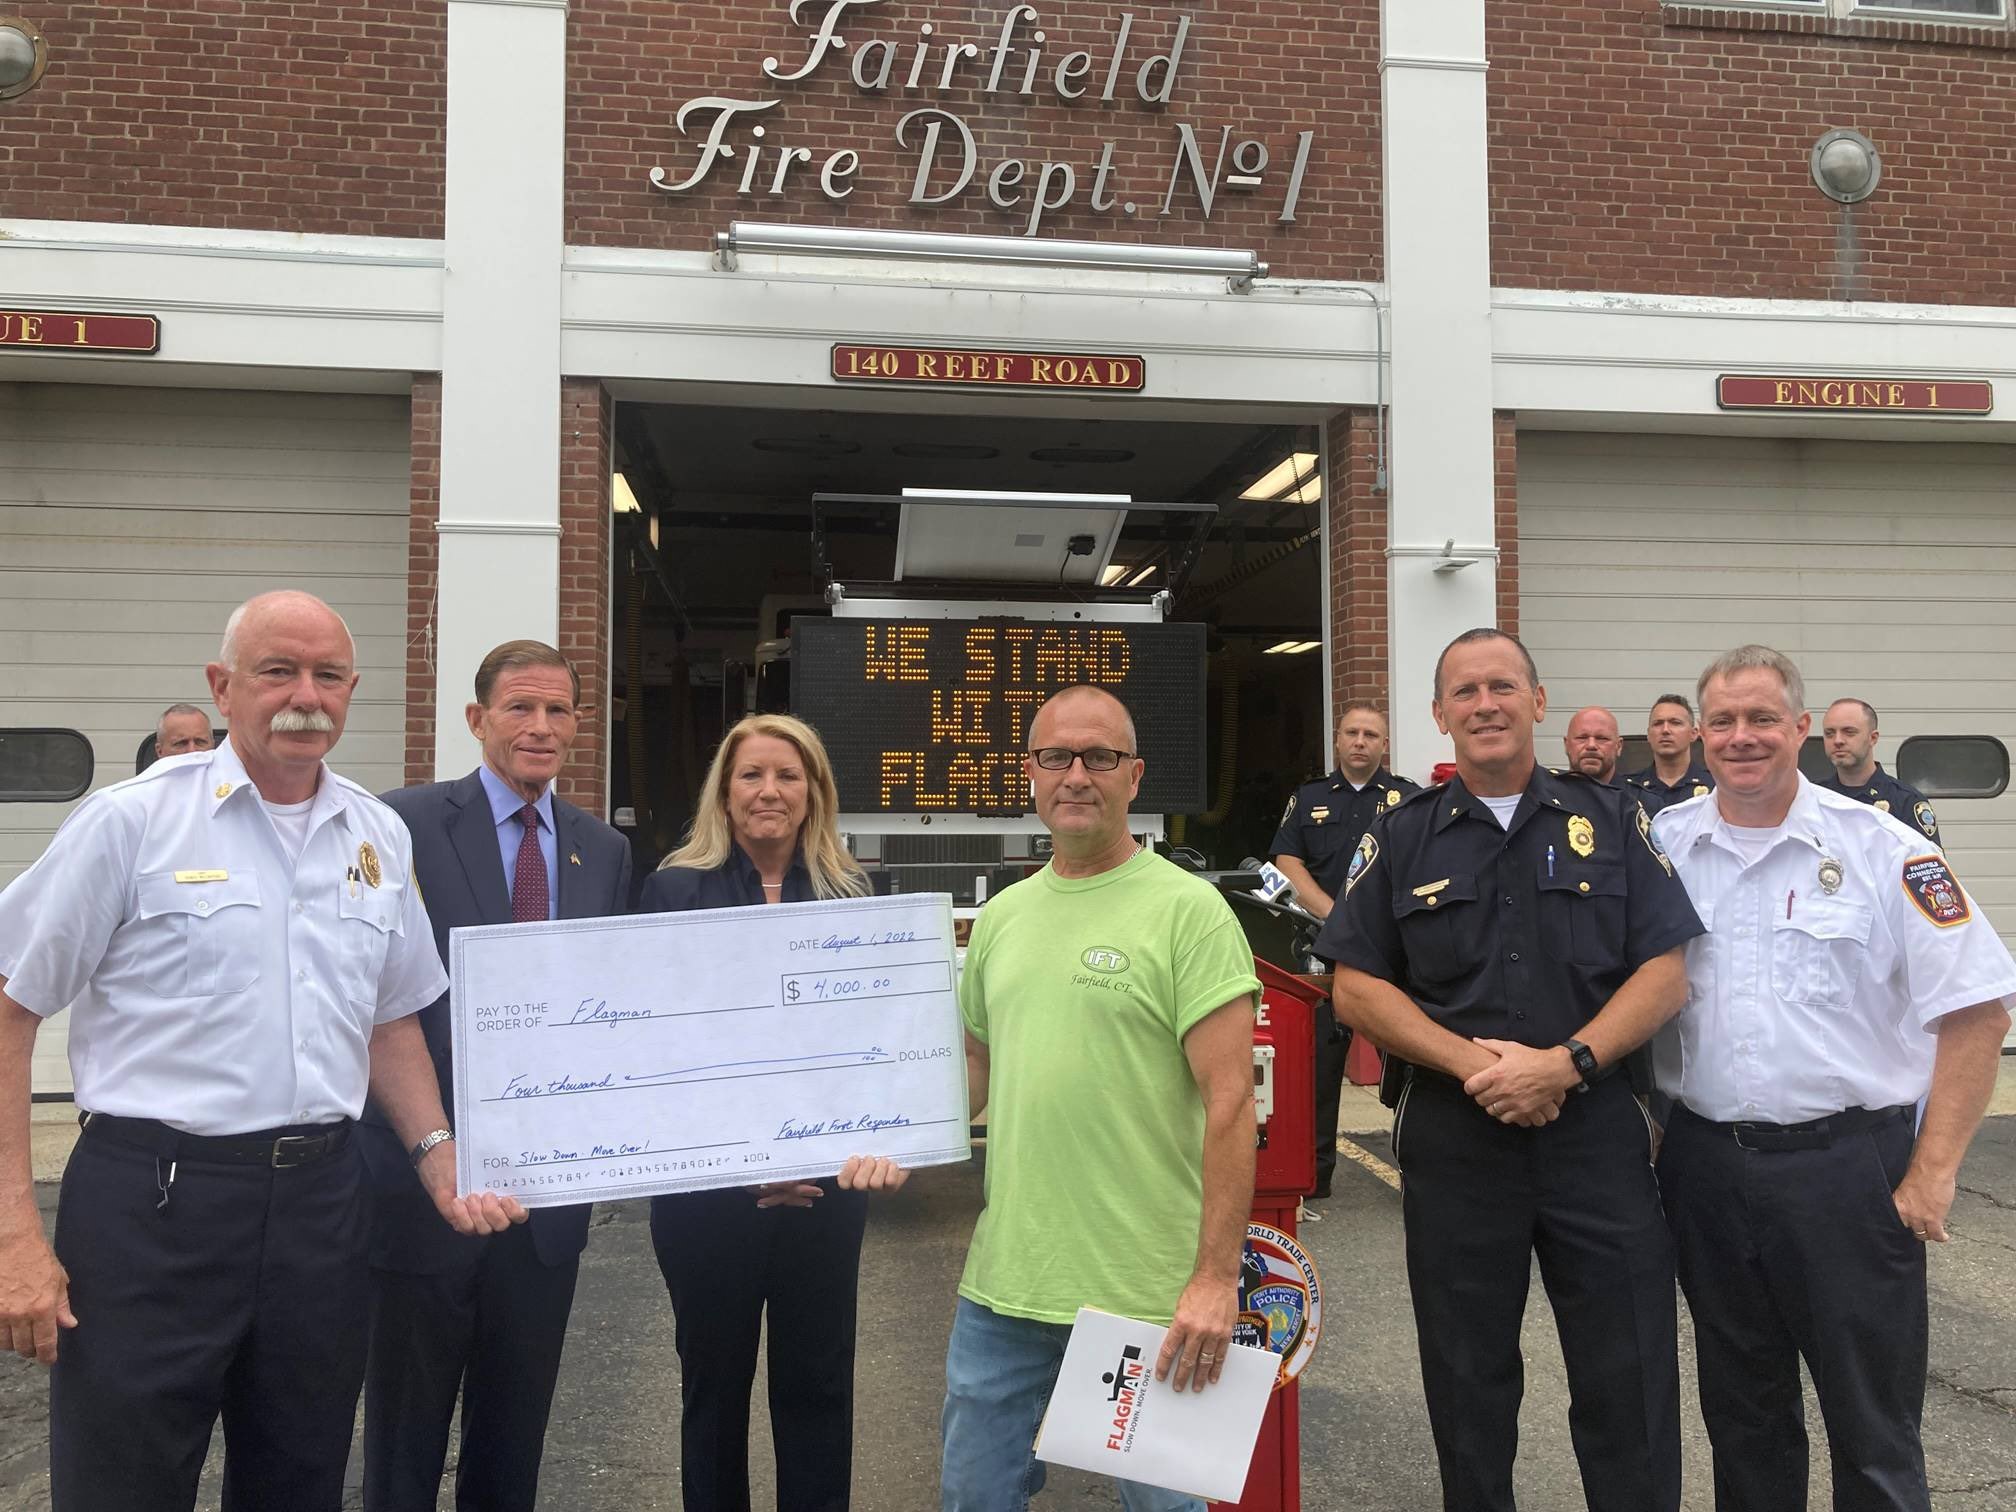 Blumenthal joined the Fairfield Police and Fairfield Fire Departments to announce their donation to the Flagman Project, a non-profit organization founded in honor of Corey John Iodice, a tow truck driver killed on the Merritt Parkway in 2020 while assisting a disabled motorist. 